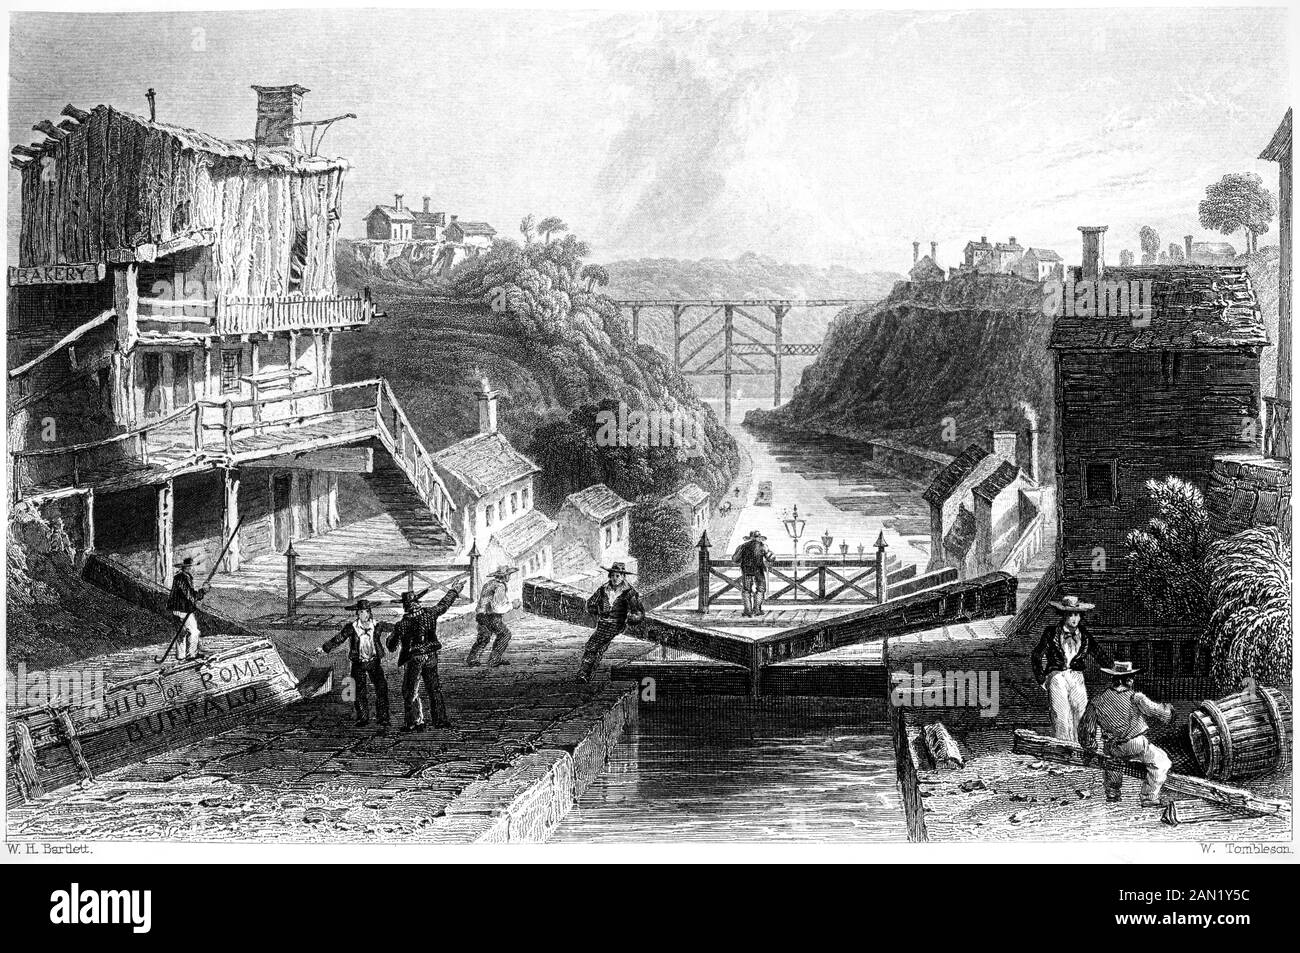 An engraving of Lockport, Erie Canal, NY state USA scanned at high resolution. from a book printed in 1840. Believed copyright free. Stock Photo